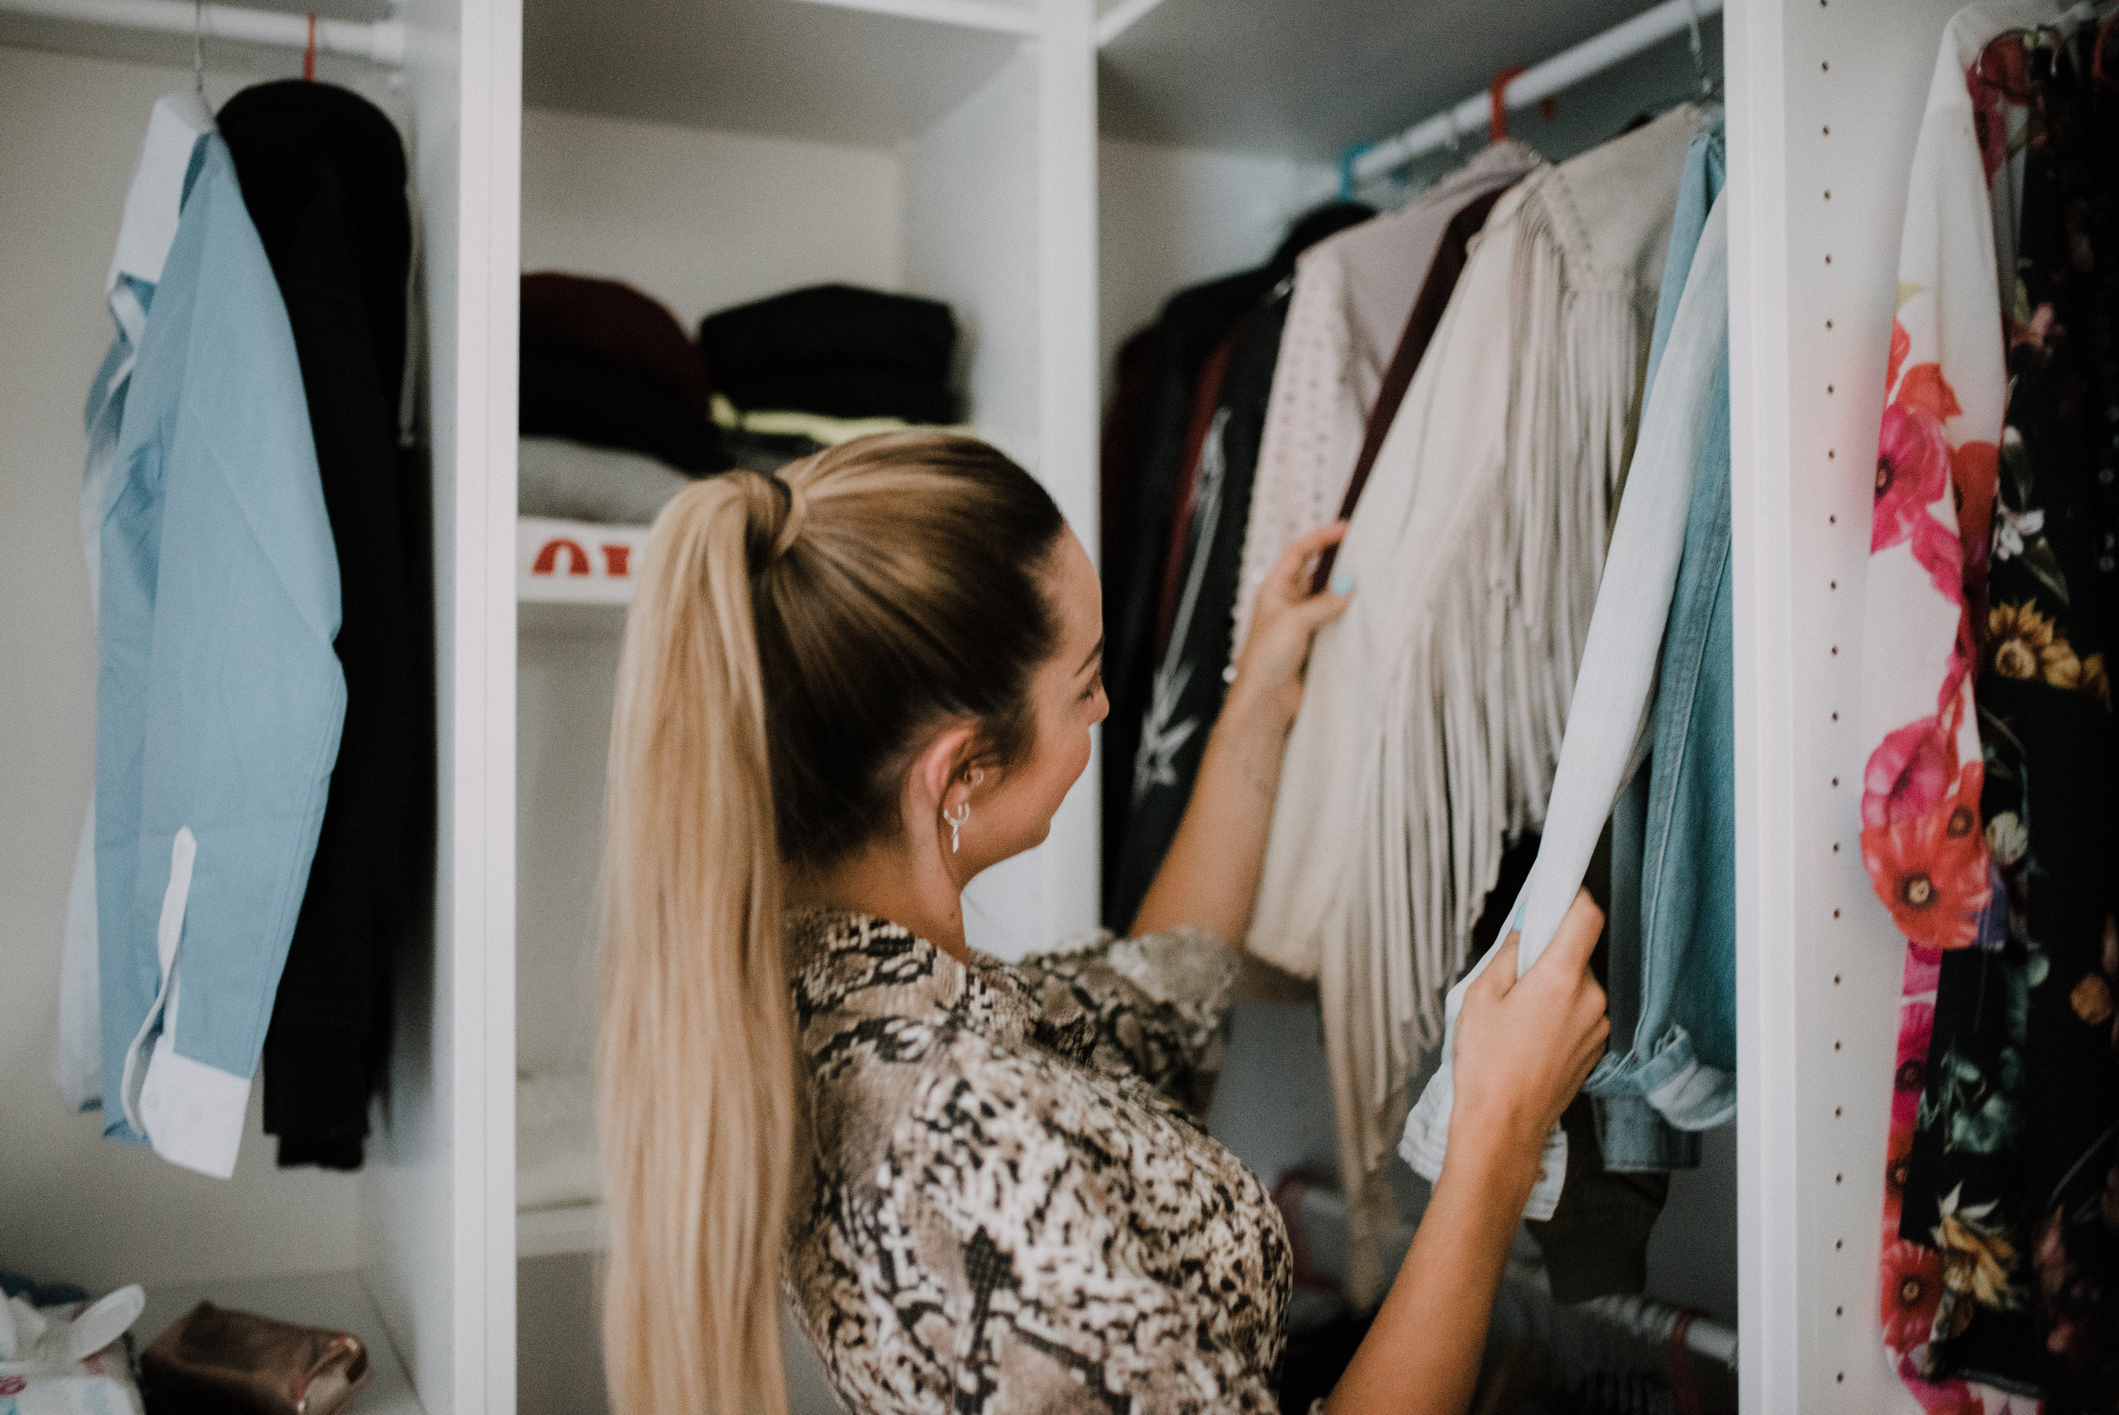 Young woman at wardrobe choosing what to wear